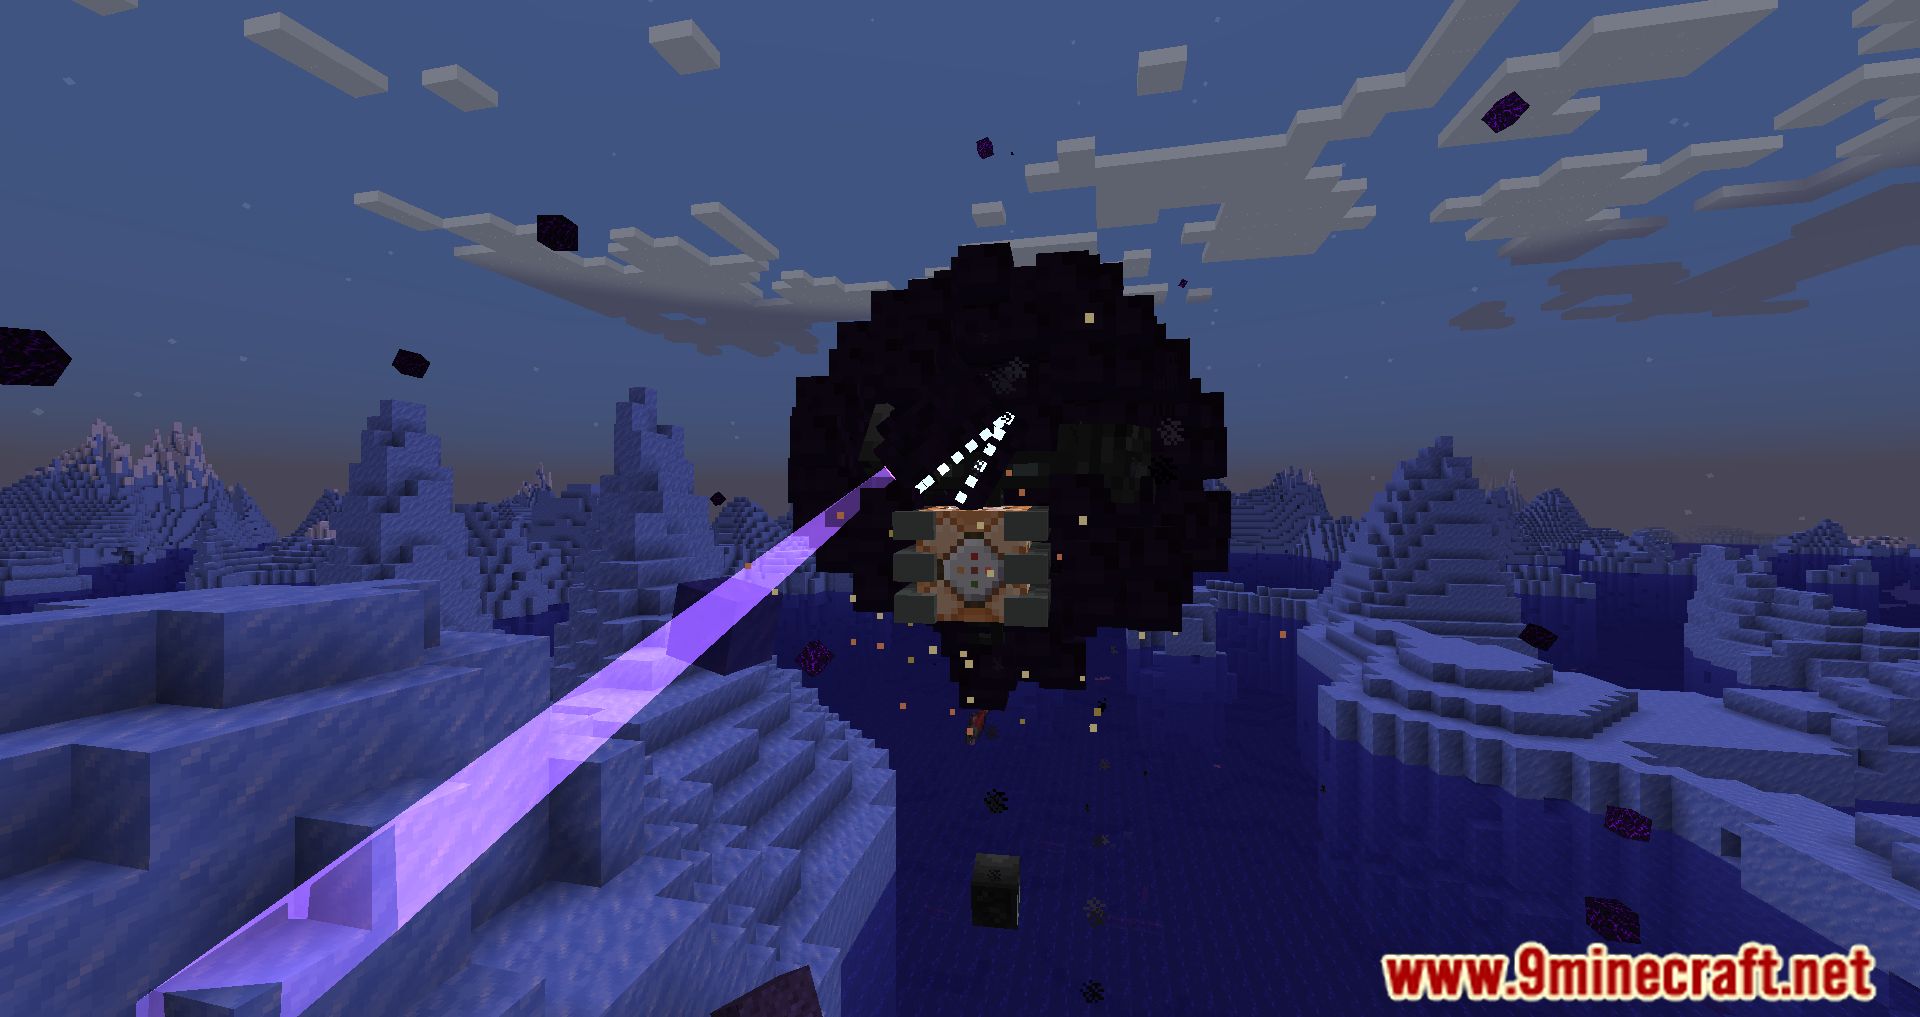 57's discs/ancient wither storm addon 